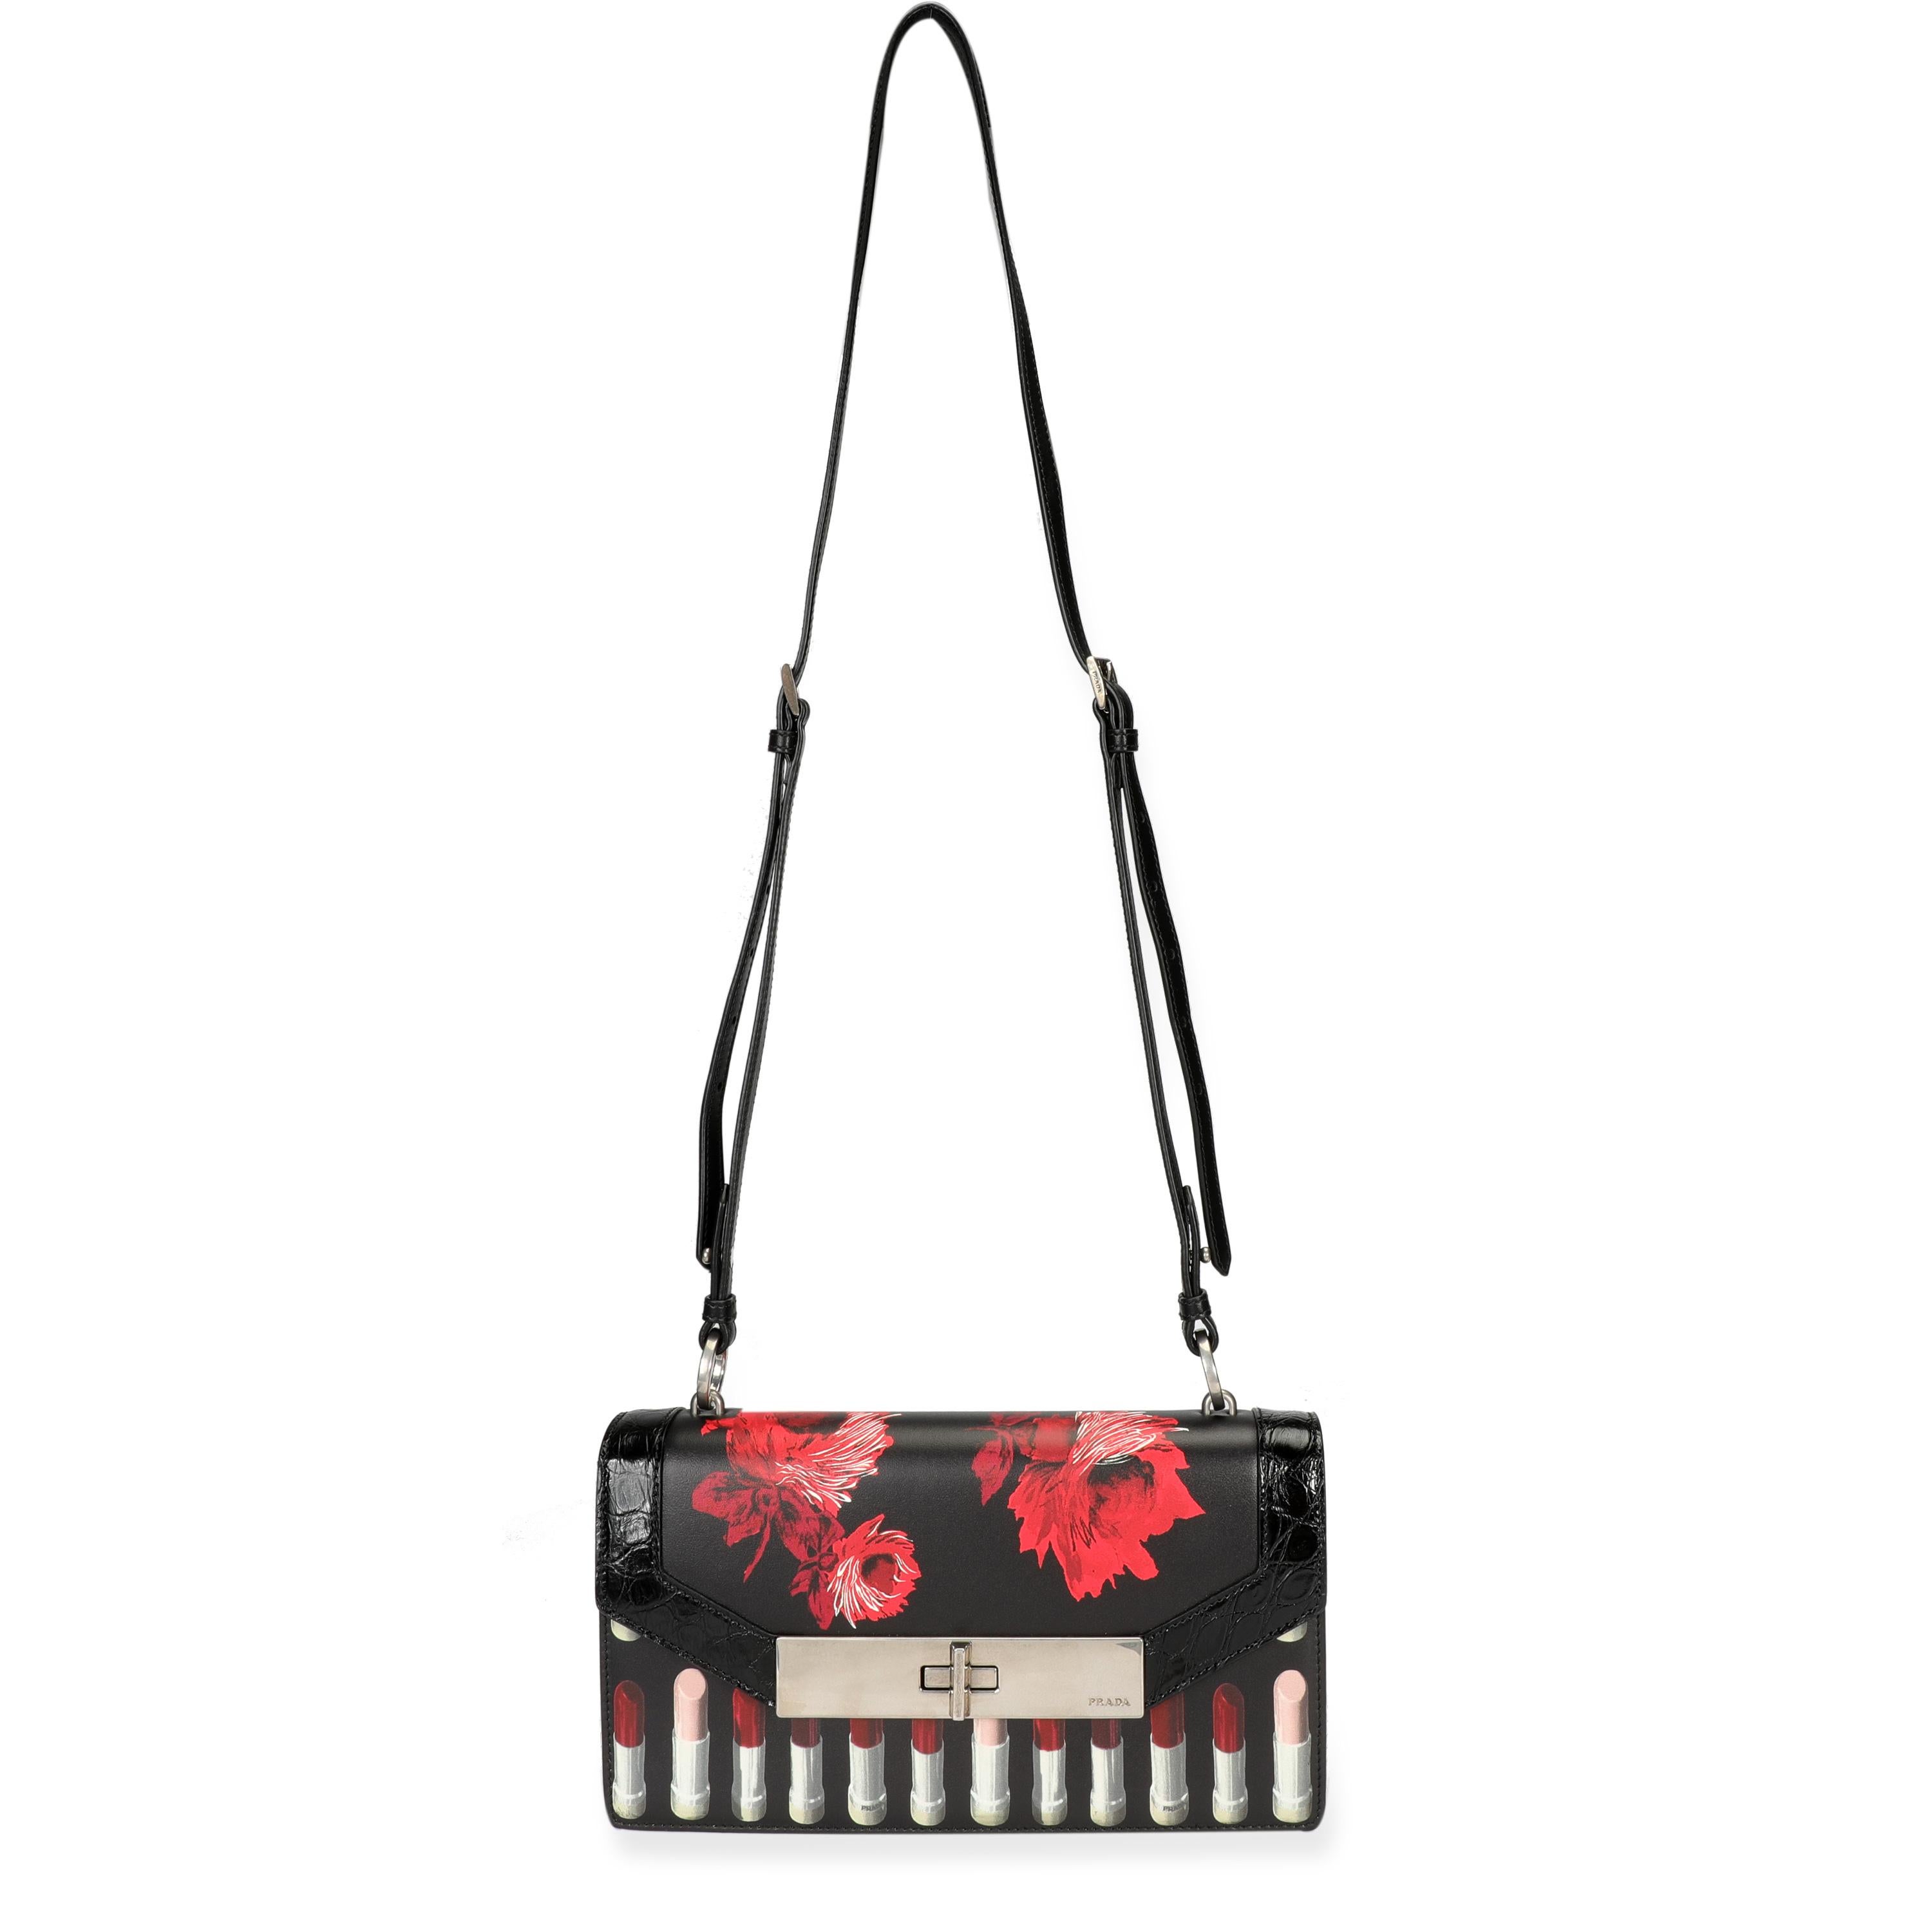 Prada Black Floral & Lipstick Print Leather Séverine Bag
SKU: 106960
MSRP: USD 3,600.00

Condition Description: The always cheeky Prada introduced the Séverine bag in 2018. This version features a floral and lipstick print with embossed